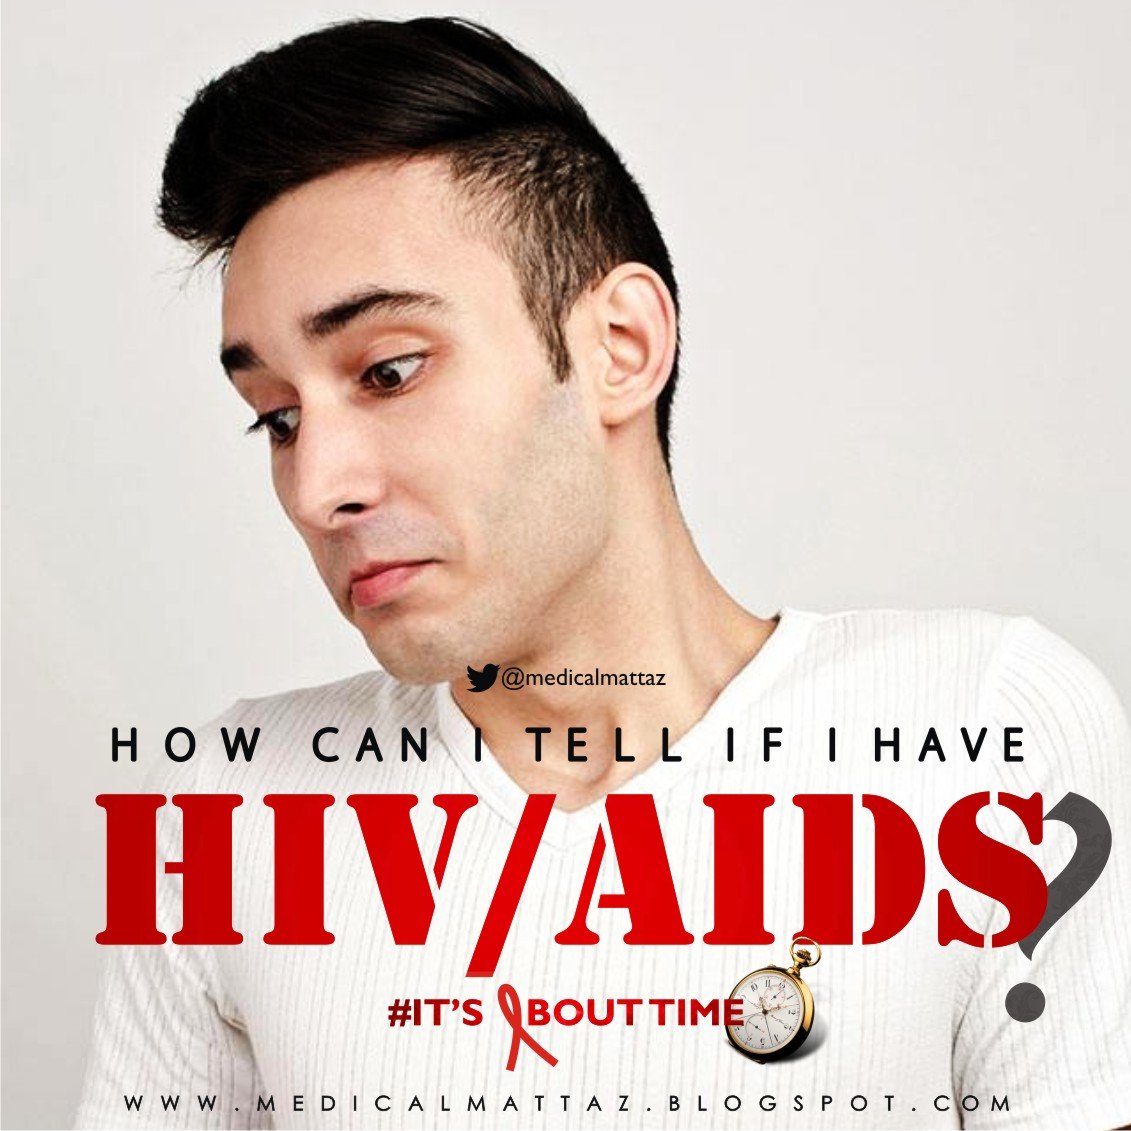 Medicalmattaz: HOW CAN I TELL IF I HAVE HIV/AIDS?